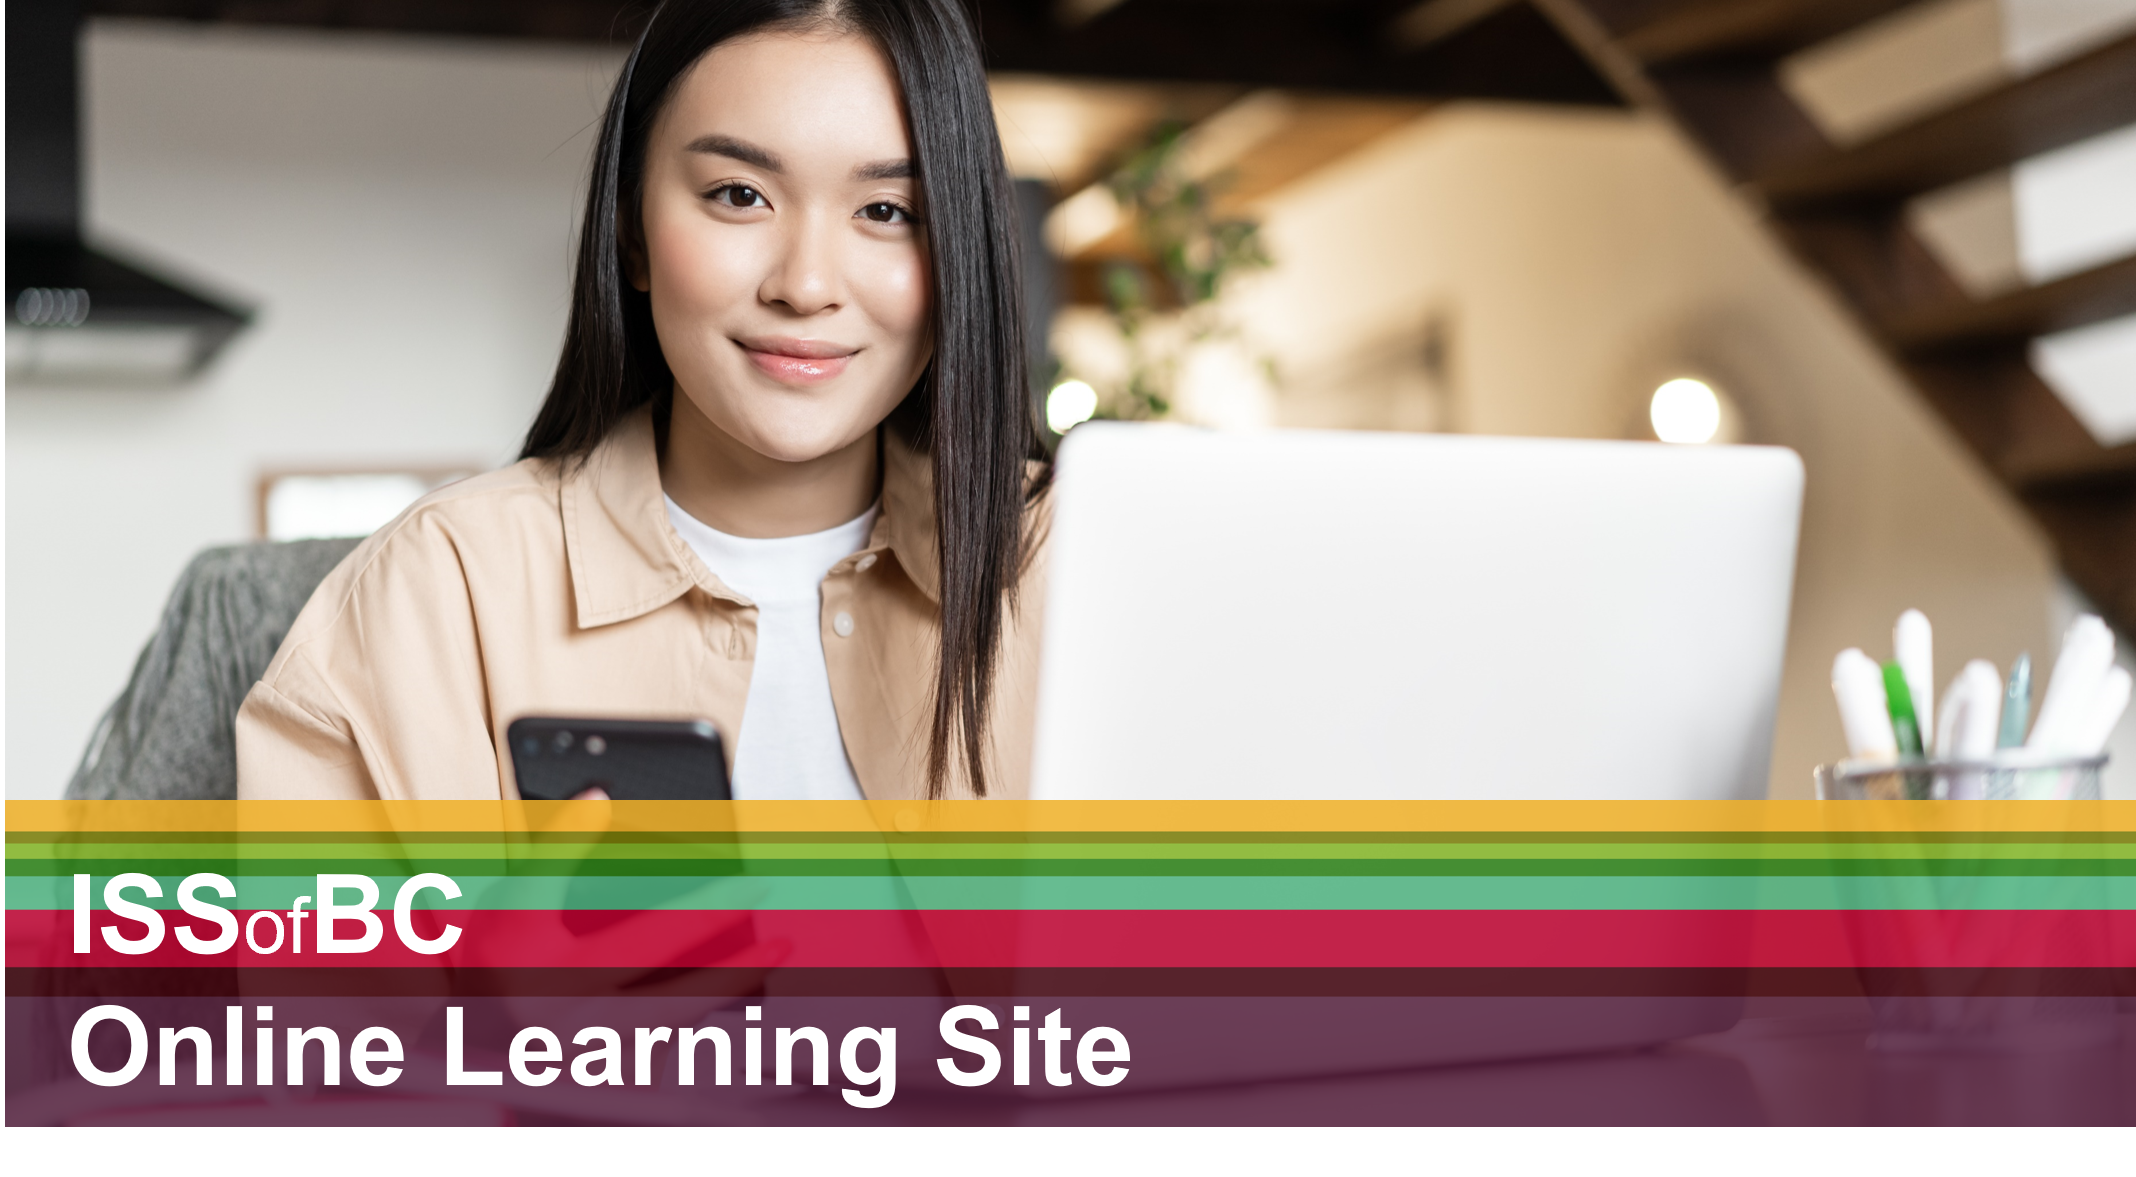 Welcome to ISSofBC Online Learning Site